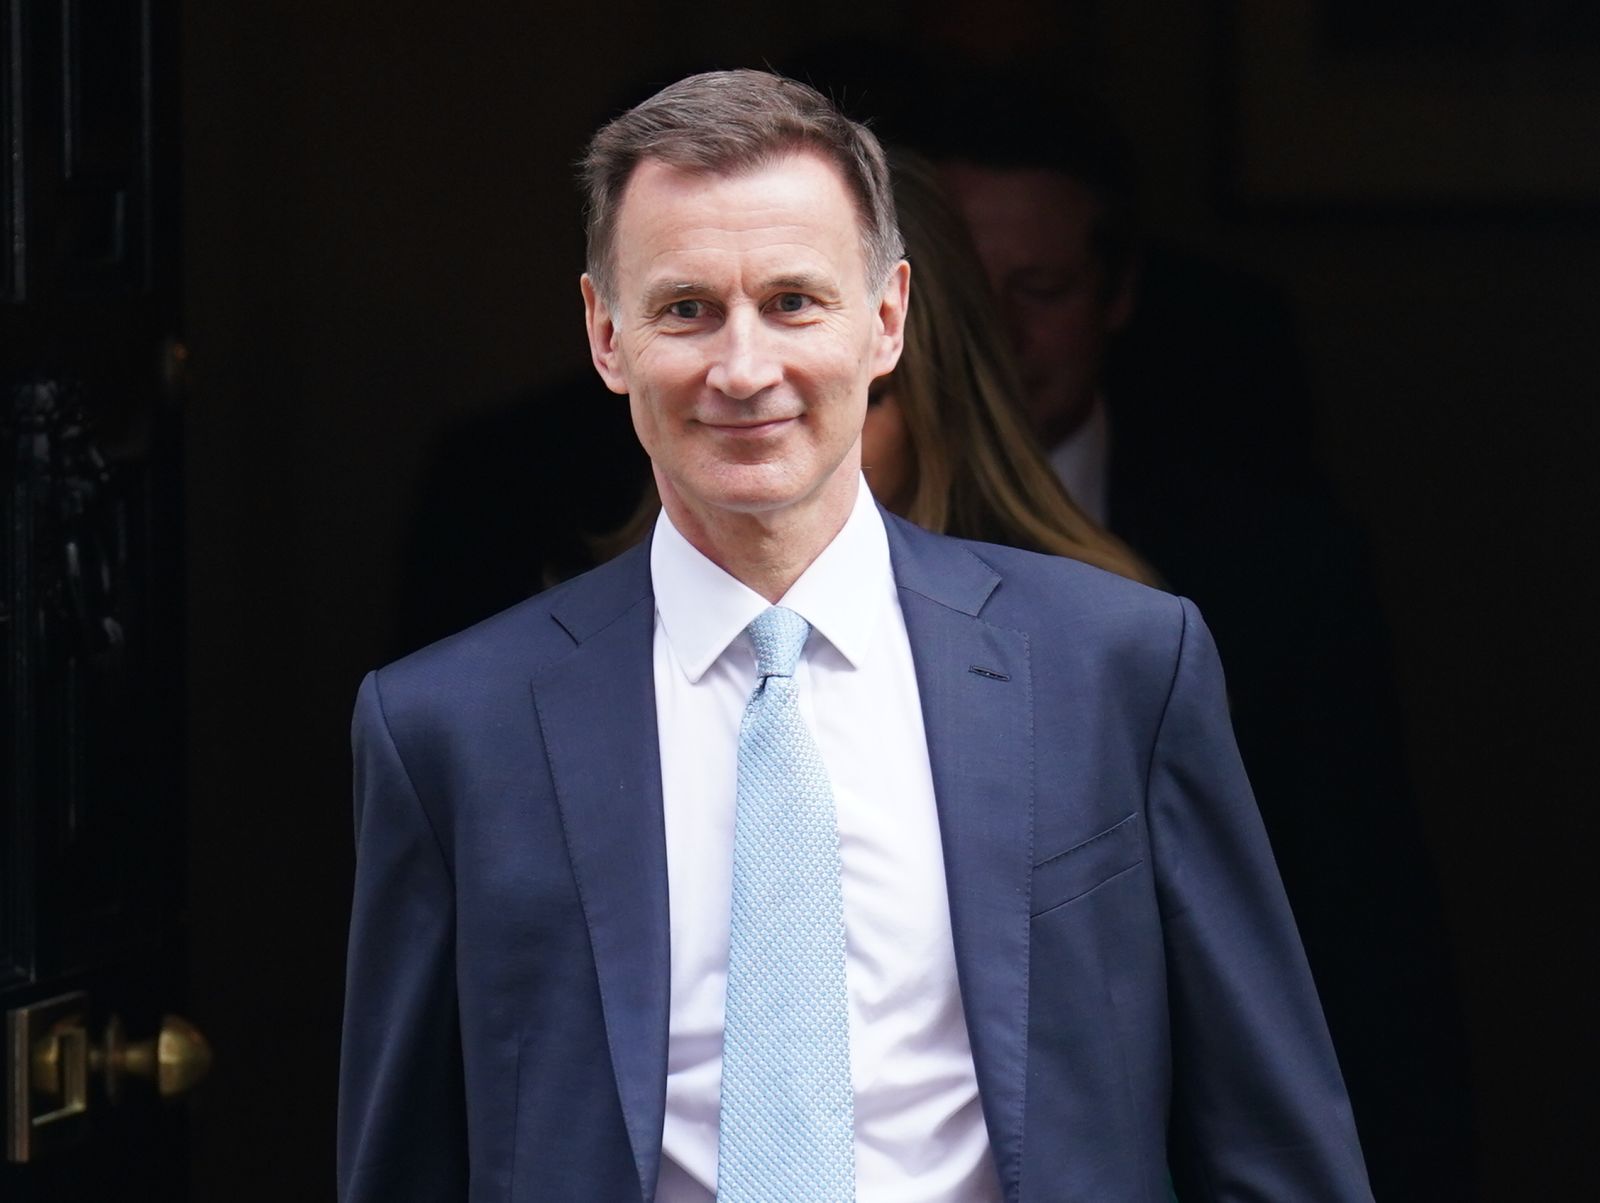 No flea problem in Downing Street after huge spend on new carpets, says Hunt